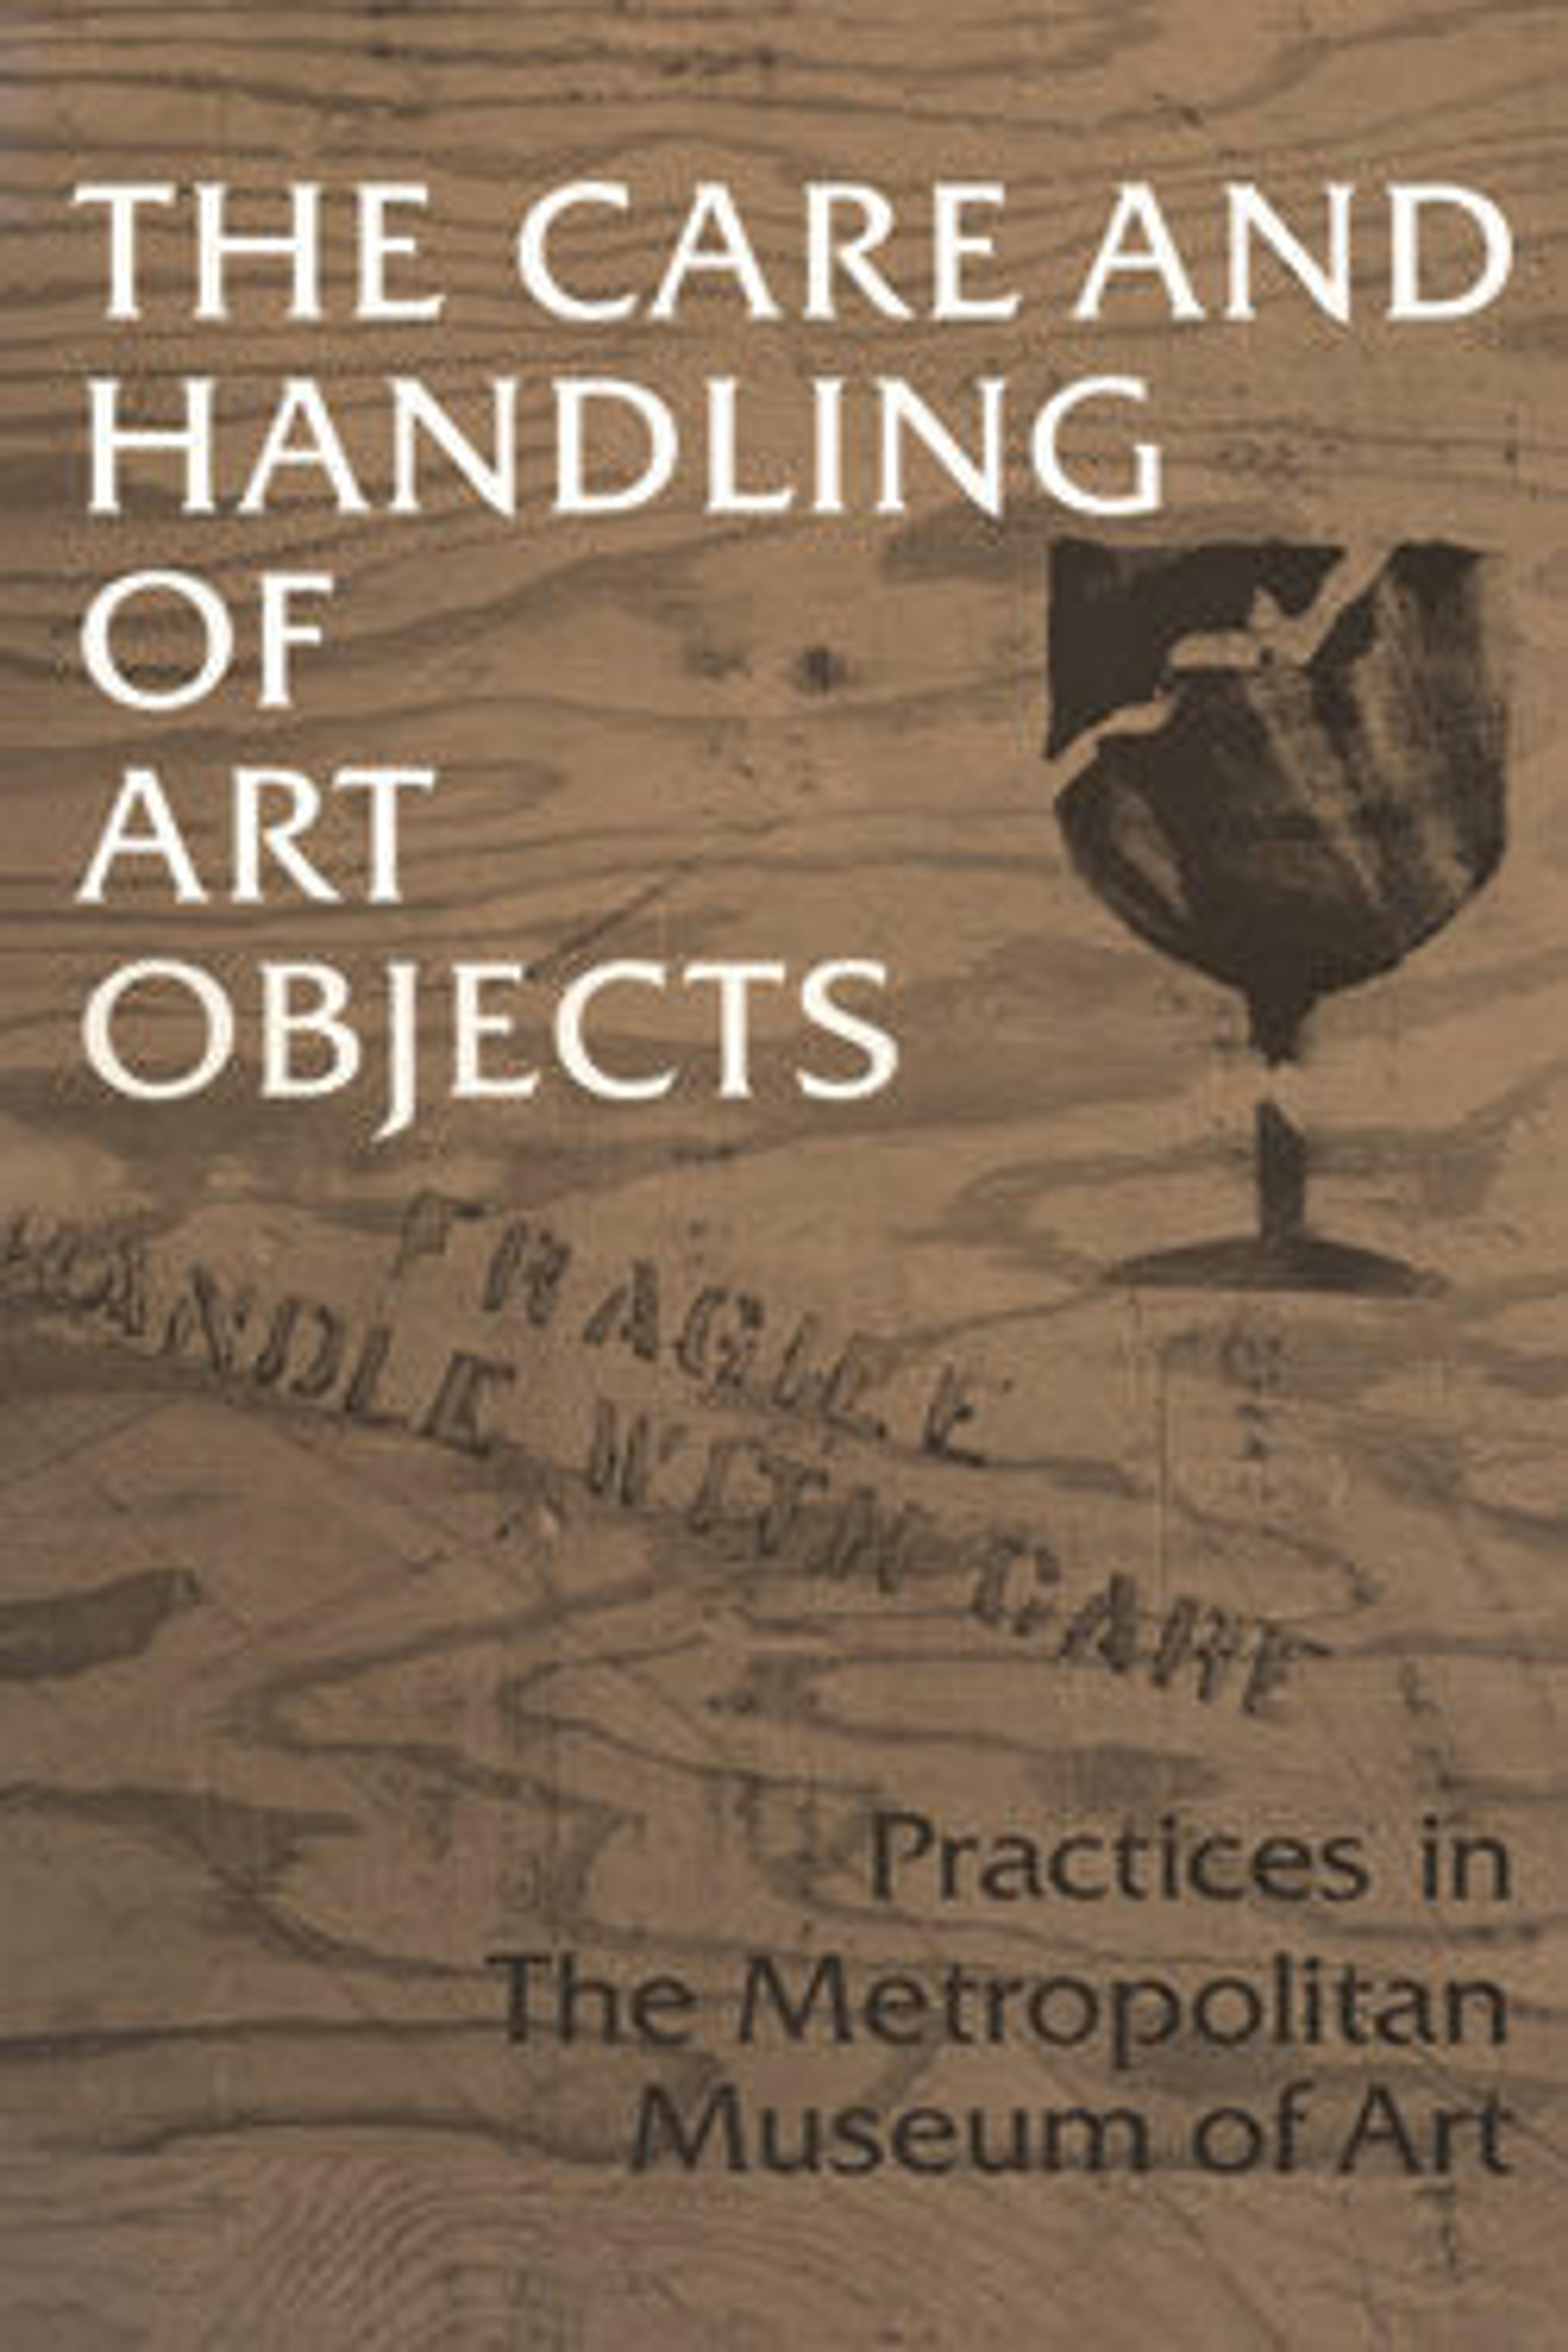 The Care and Handling of Art Objects: Practices in The Metropolitan Museum of Art